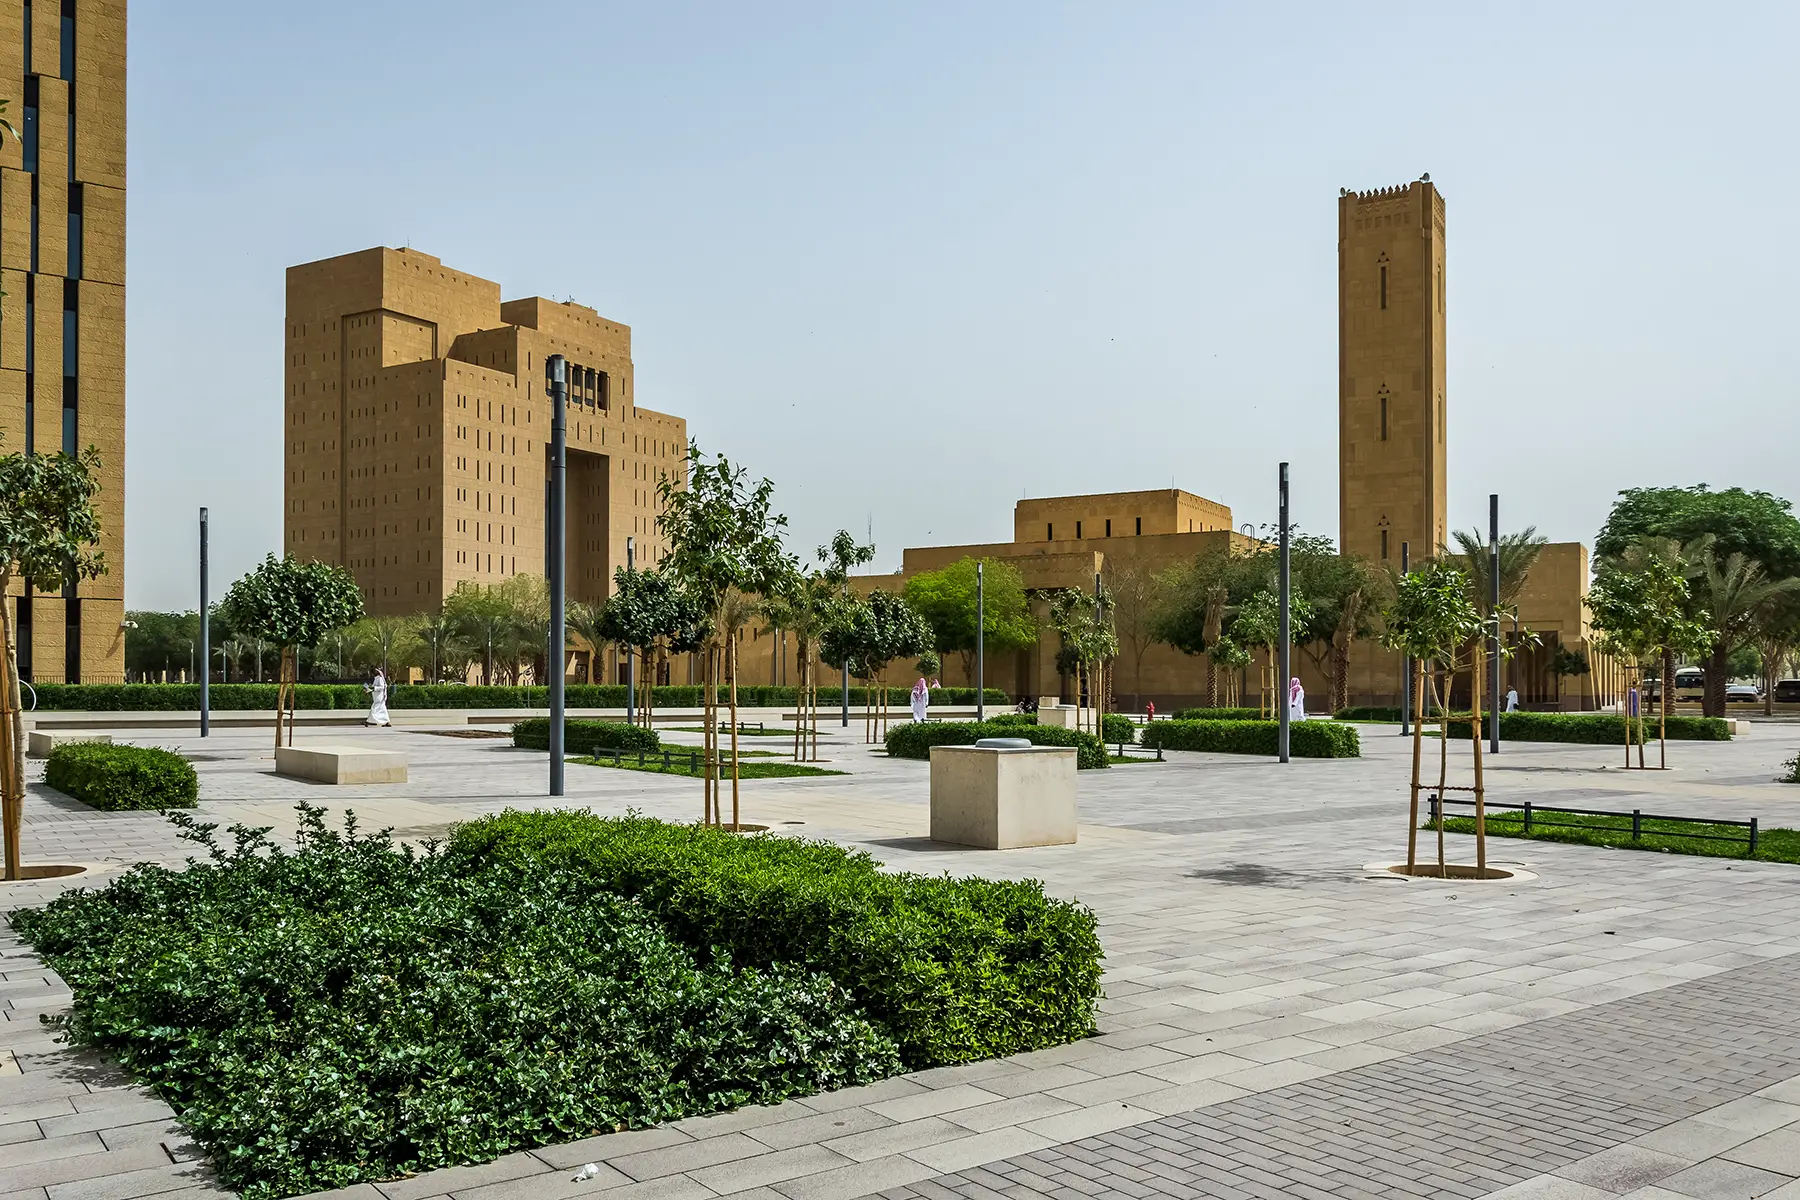 View of Criminal Court in Riyadh, Saudi Arabia. Large brown buildings in old town with large square in front